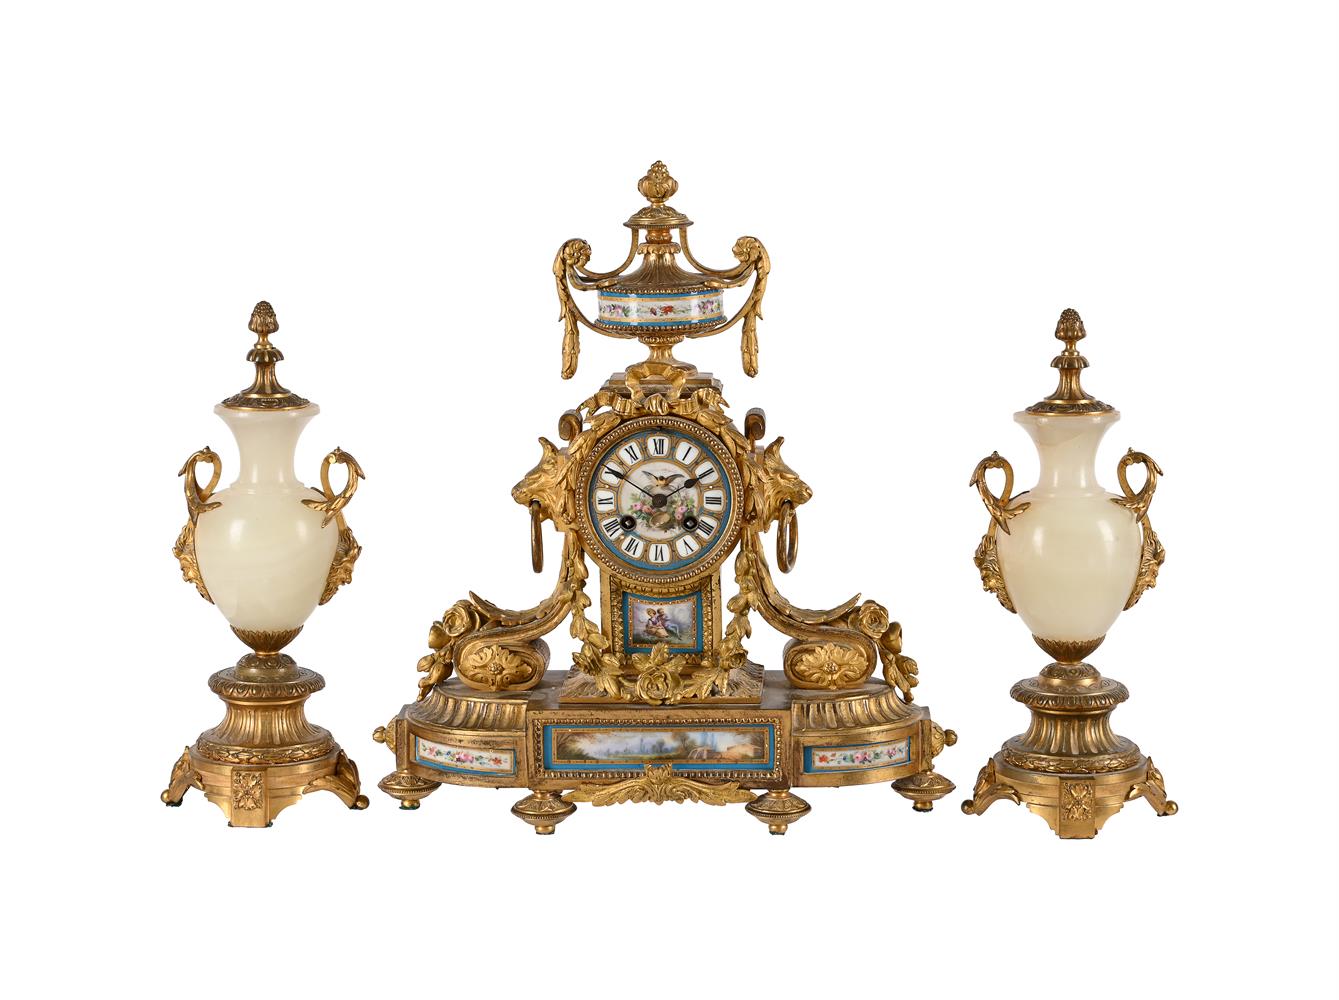 A FRENCH SEVRES STYLE PORCELAIN INSET ORMOLU MANTEL CLOCK